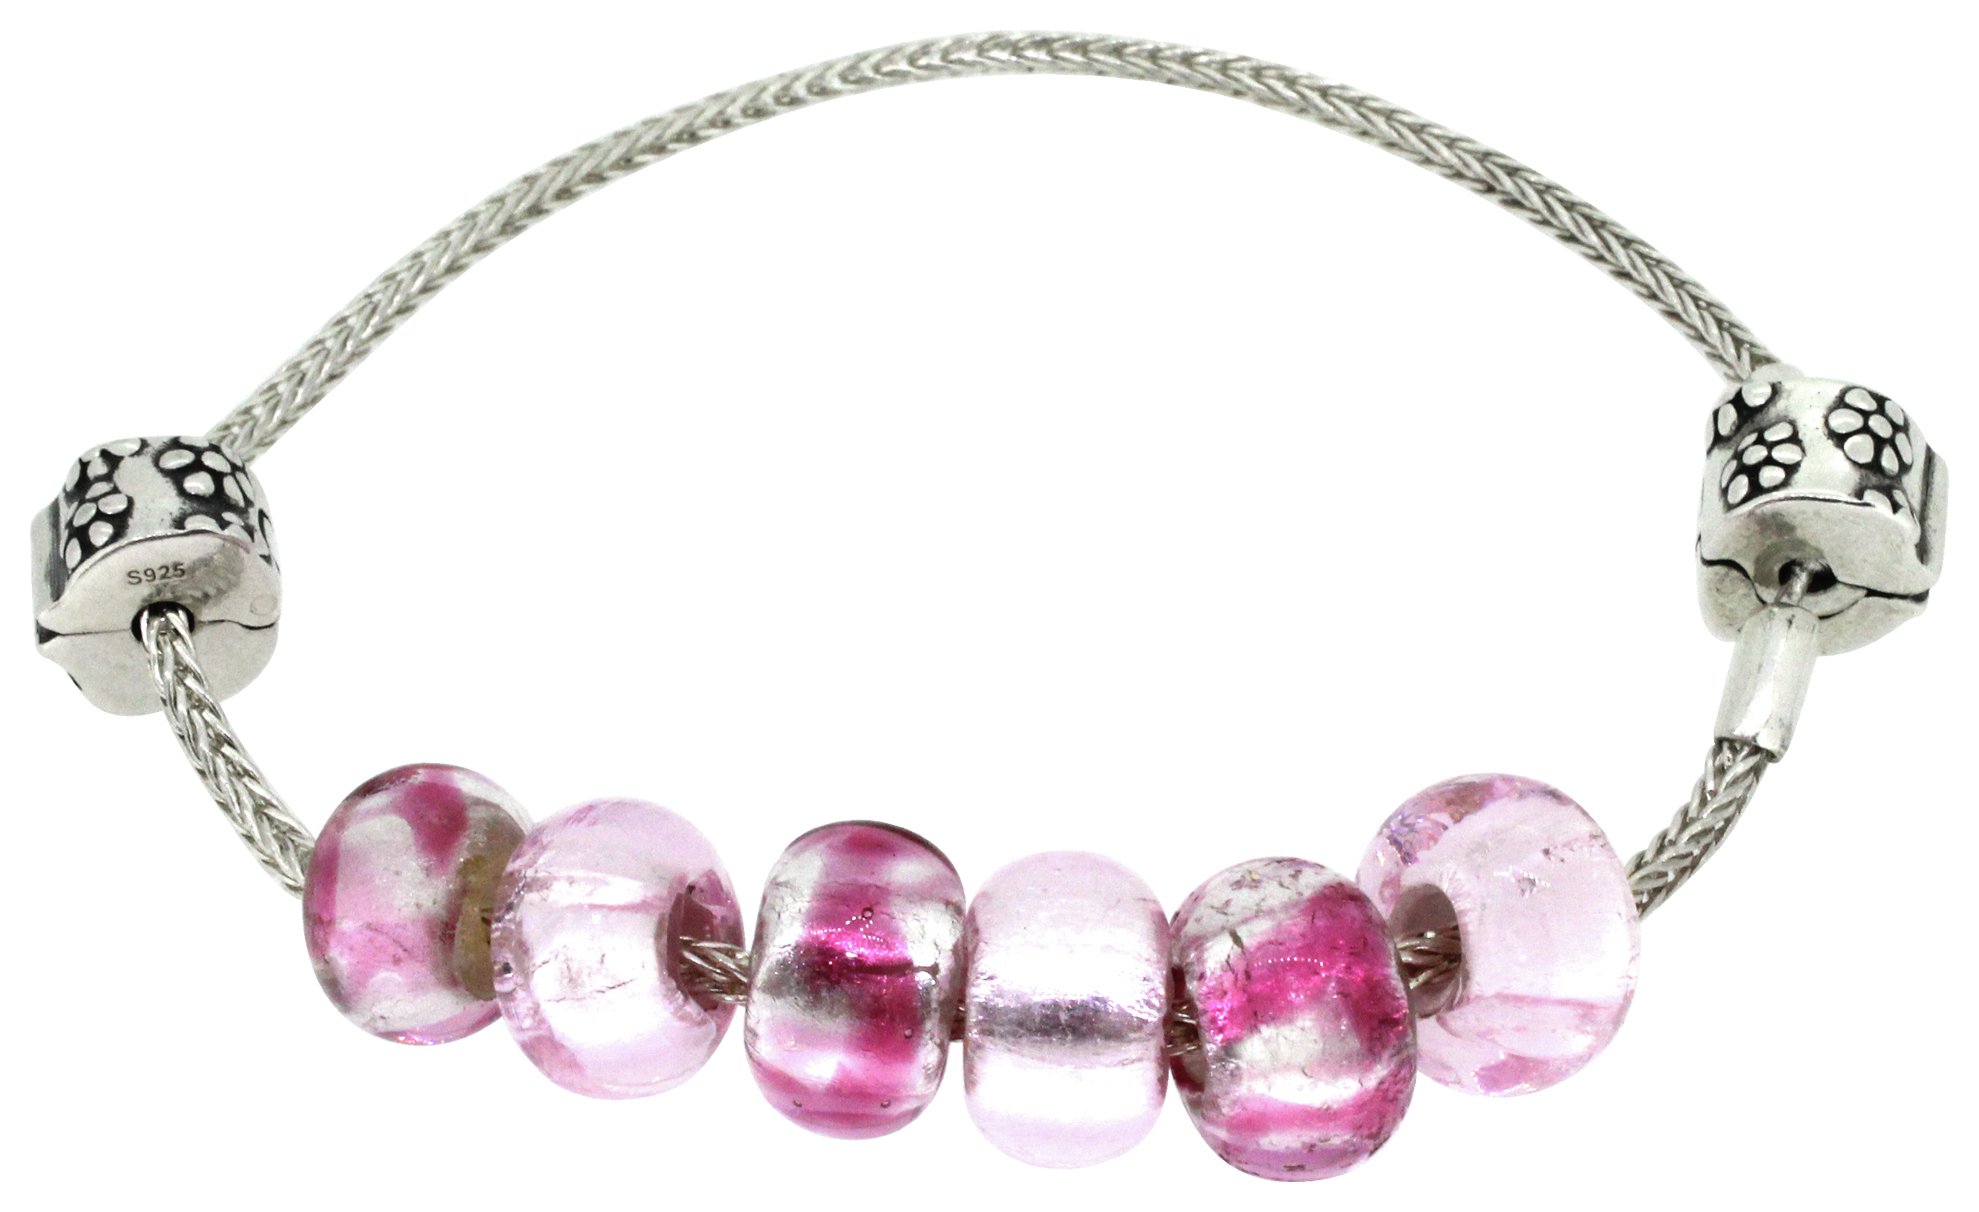 Miss Glitter Silver Made Up Pink Bracelet with Stopper